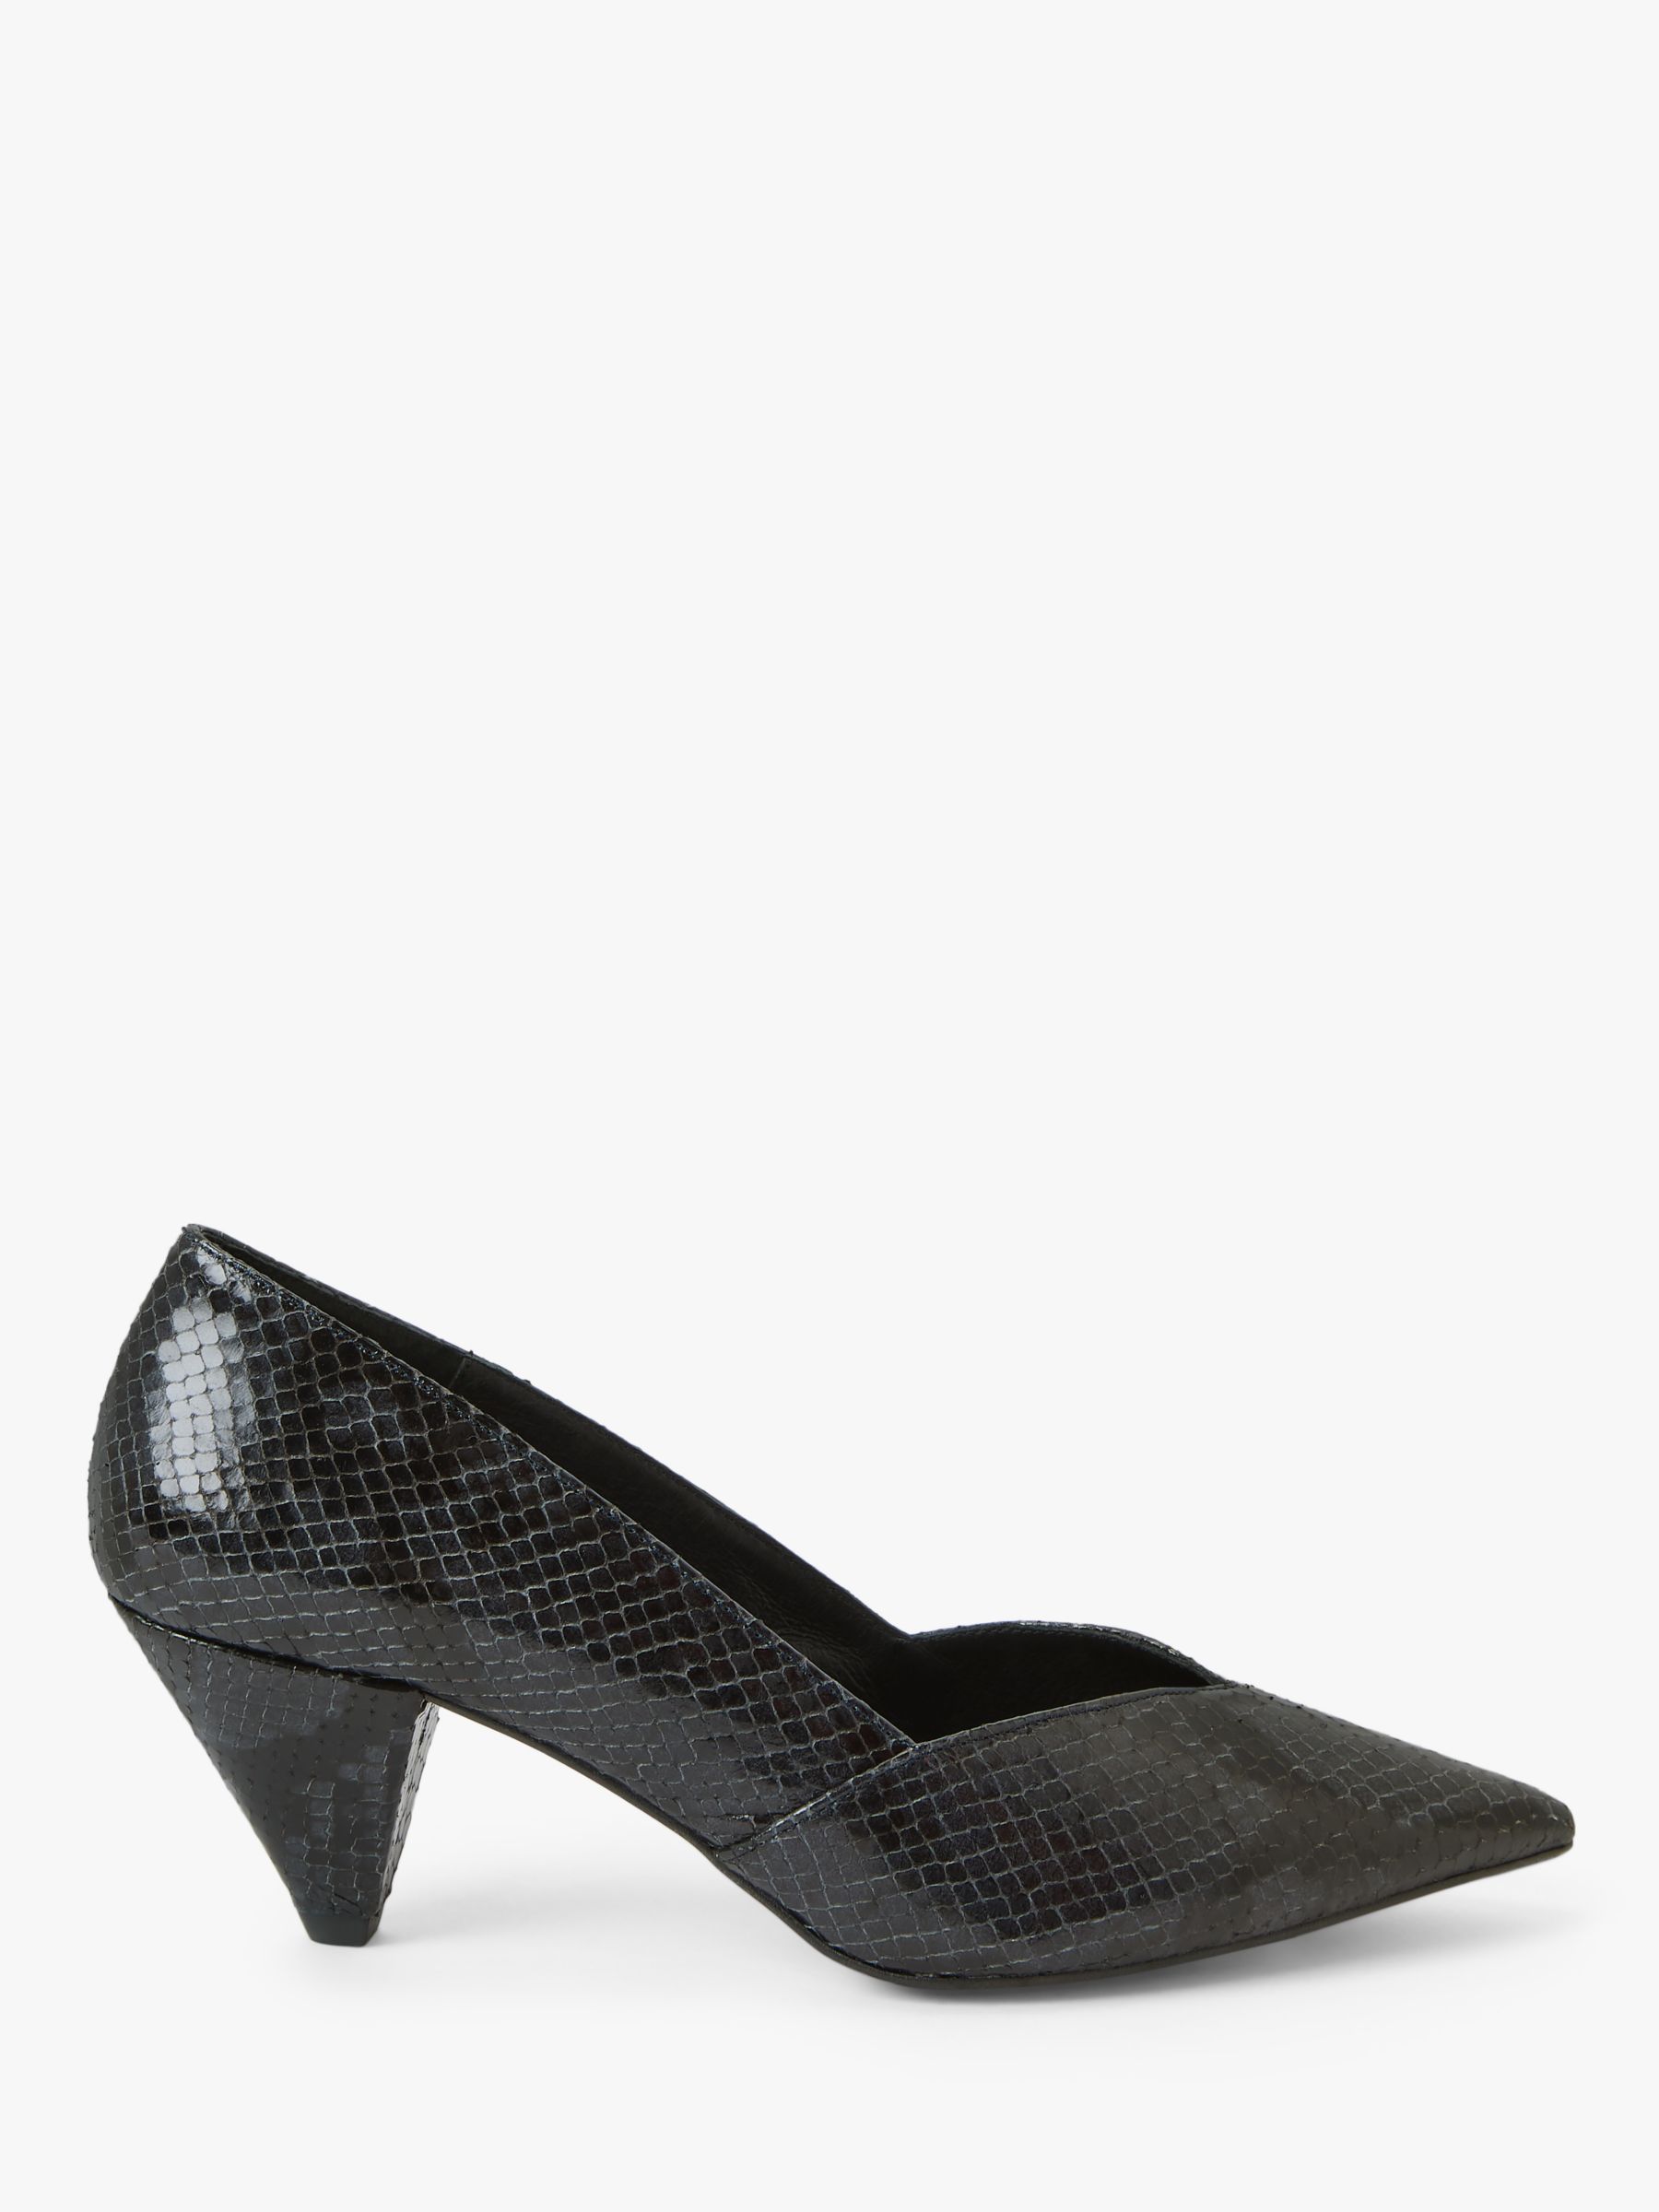 AND/OR Ready Cone Heel Leather Court Shoes, Navy